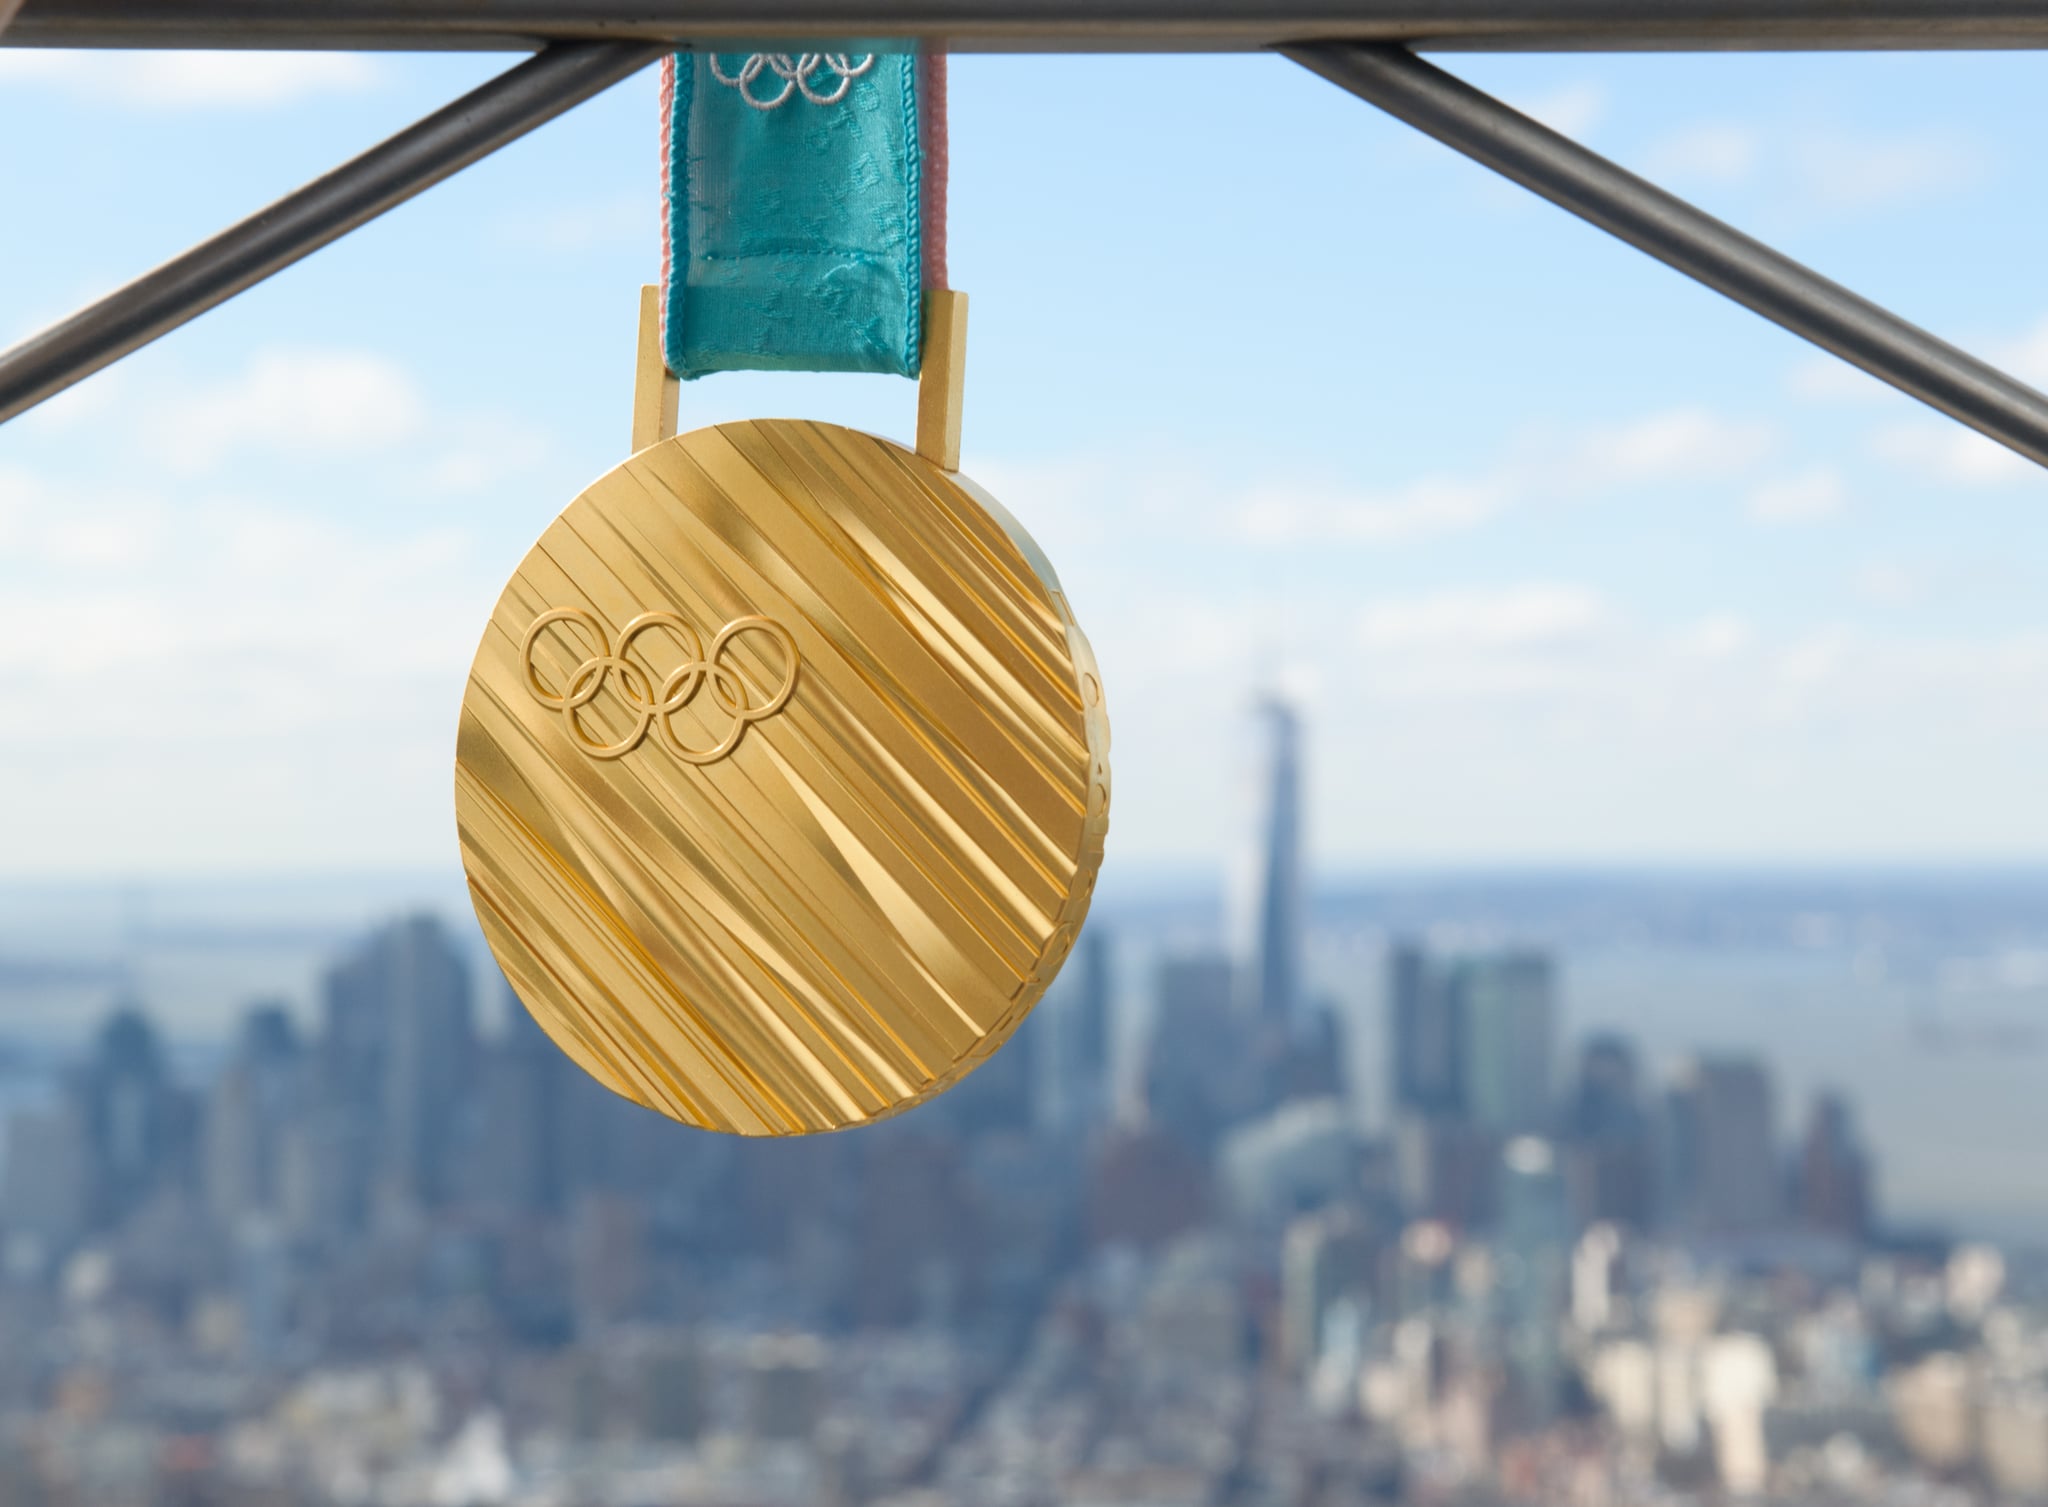 NEW YORK, NY - MARCH 05:  A view of the Ice Hockey Olympic Gold medal at The Empire State Building at The Empire State Building on March 5, 2018 in New York City.  (Photo by Noam Galai/Getty Images)